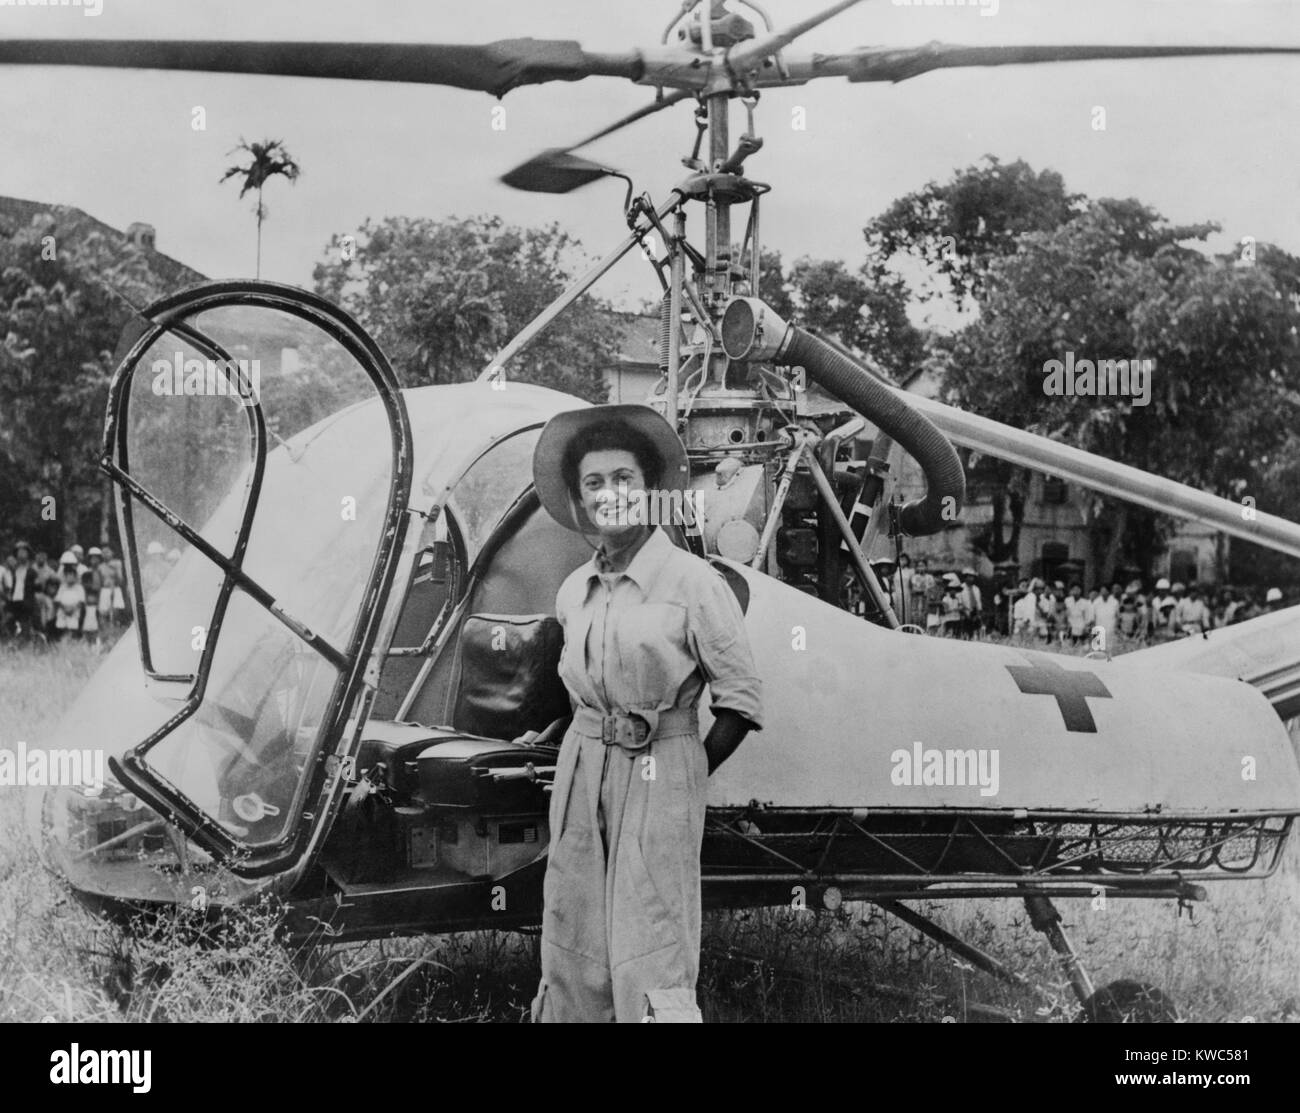 Dr. Valerie Andre, in front of her helicopter in Tonkin, Vietnam, in 1952. She served in the French army as a neurosurgeon, and learned to fly helicopters to reach wounded soldiers. From 1952-53, she rescued 165 soldiers and parachuted to treat wounded needing immediate surgery. In 1976 she became the first Women to reach the rank of General Officer in the French Army. (BSLOC 2015 14 120) Stock Photo